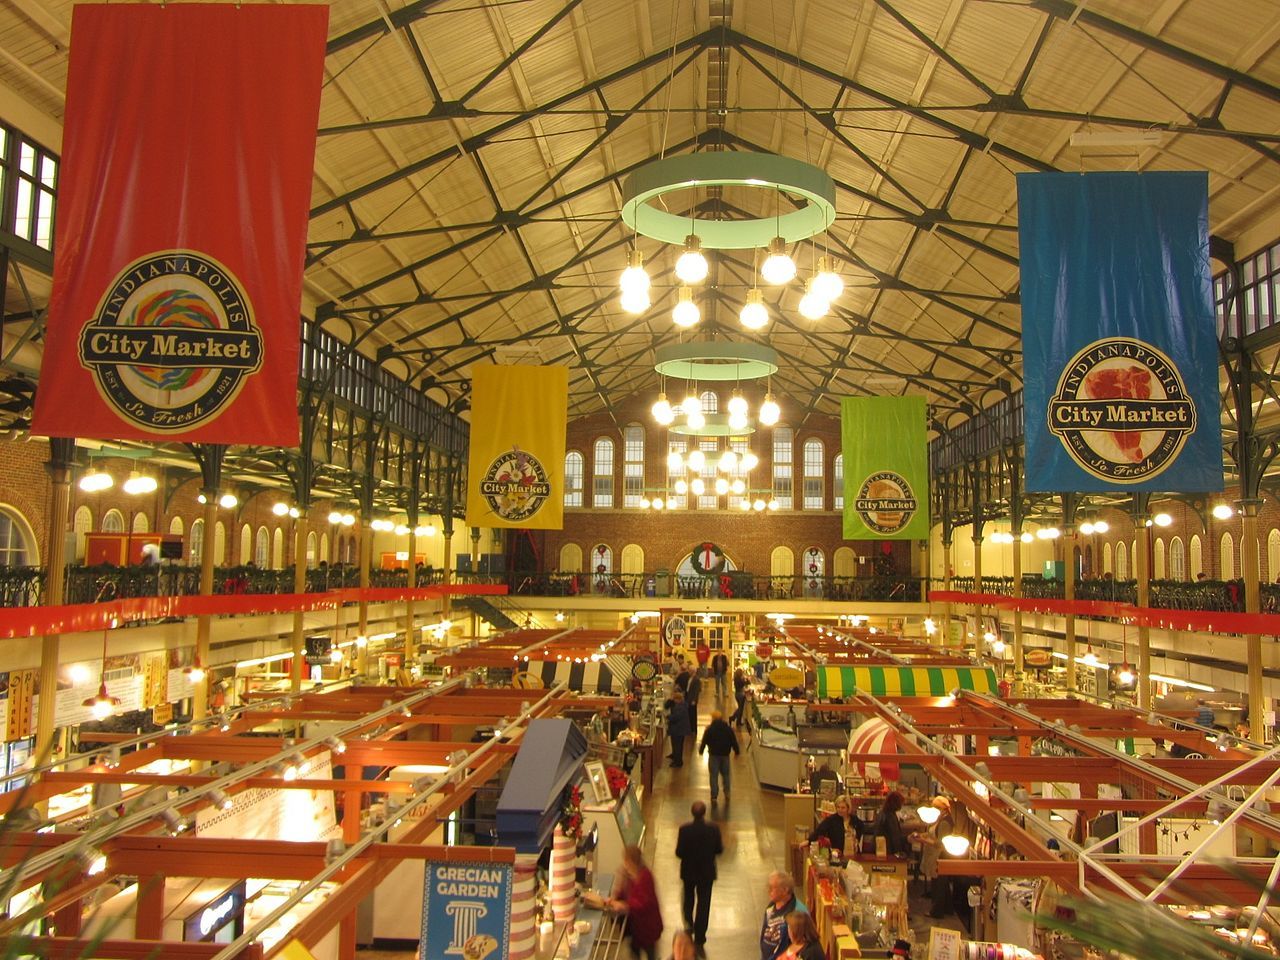 Have your fill and dine at the Indianapolis City Market